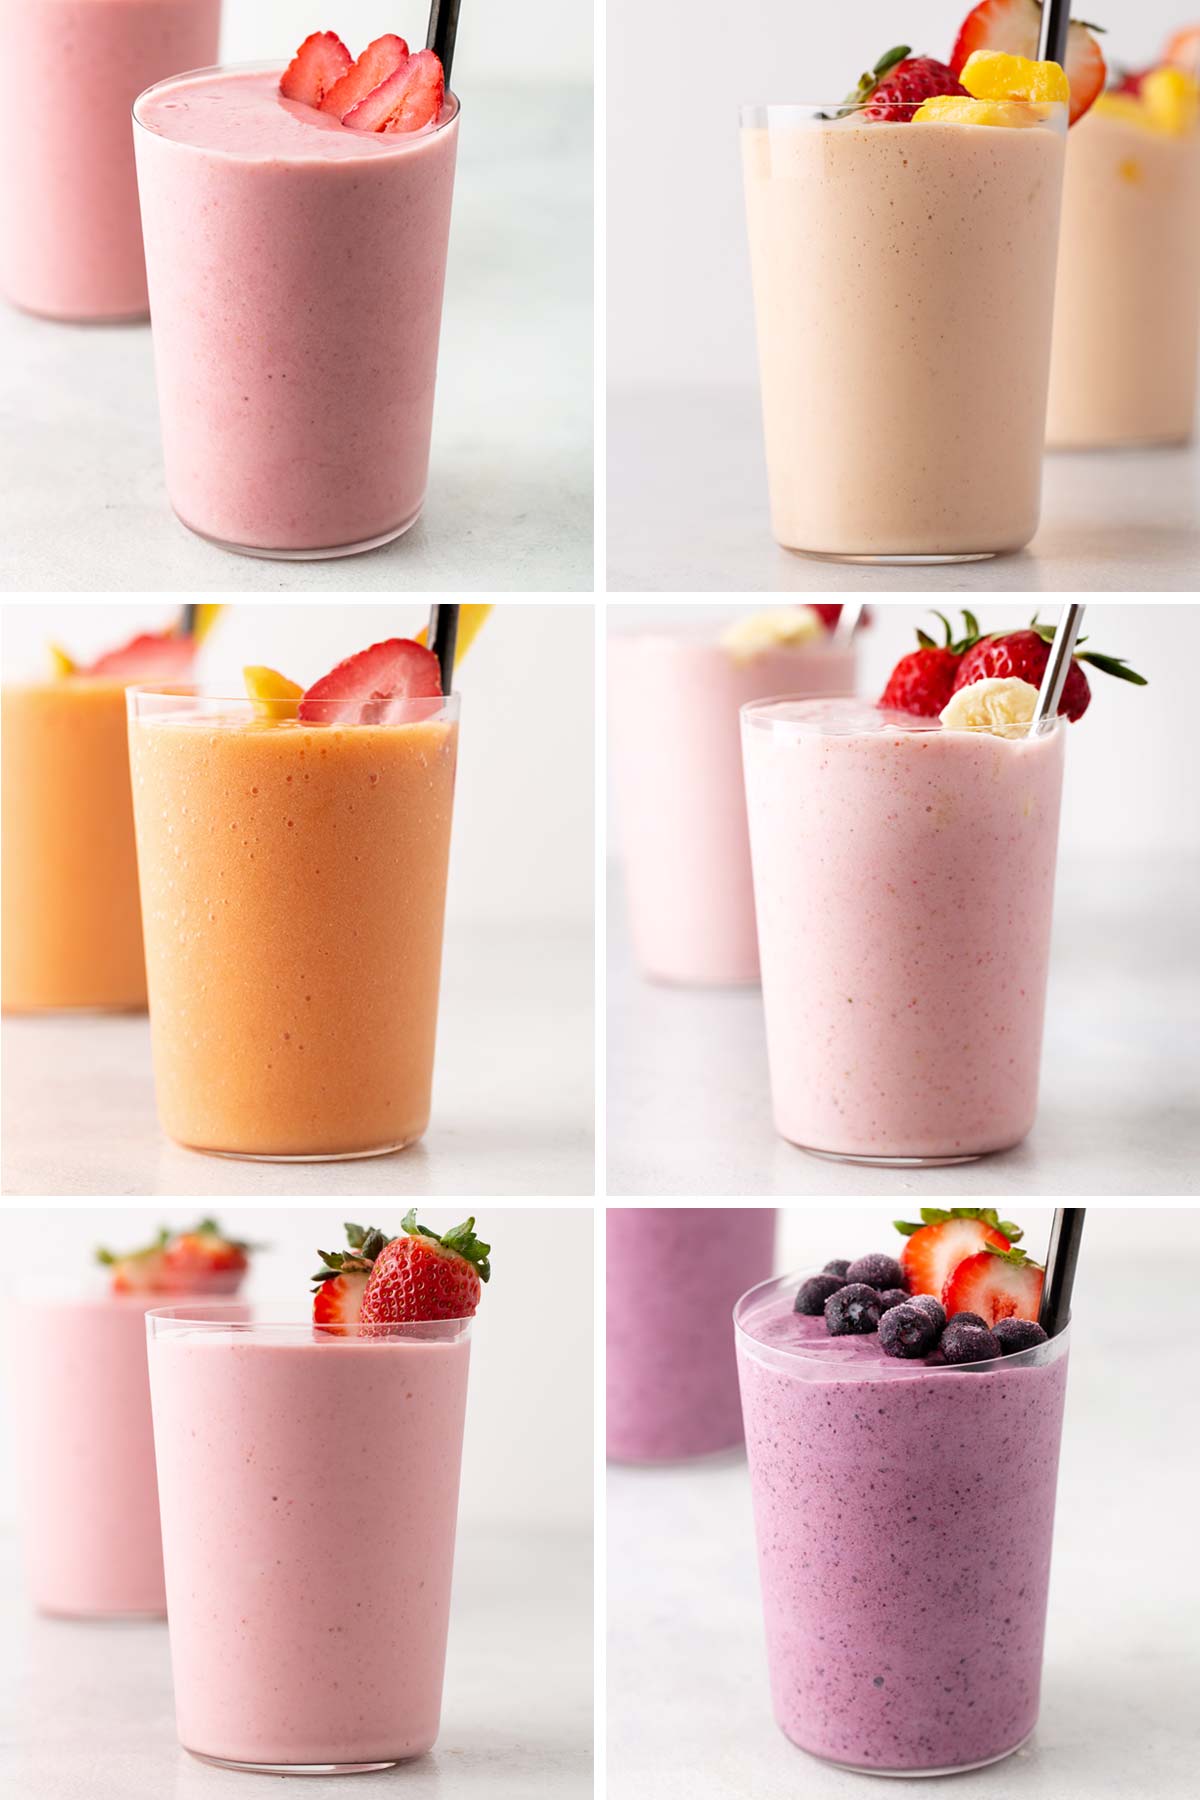 Strawberry smoothies in glasses.